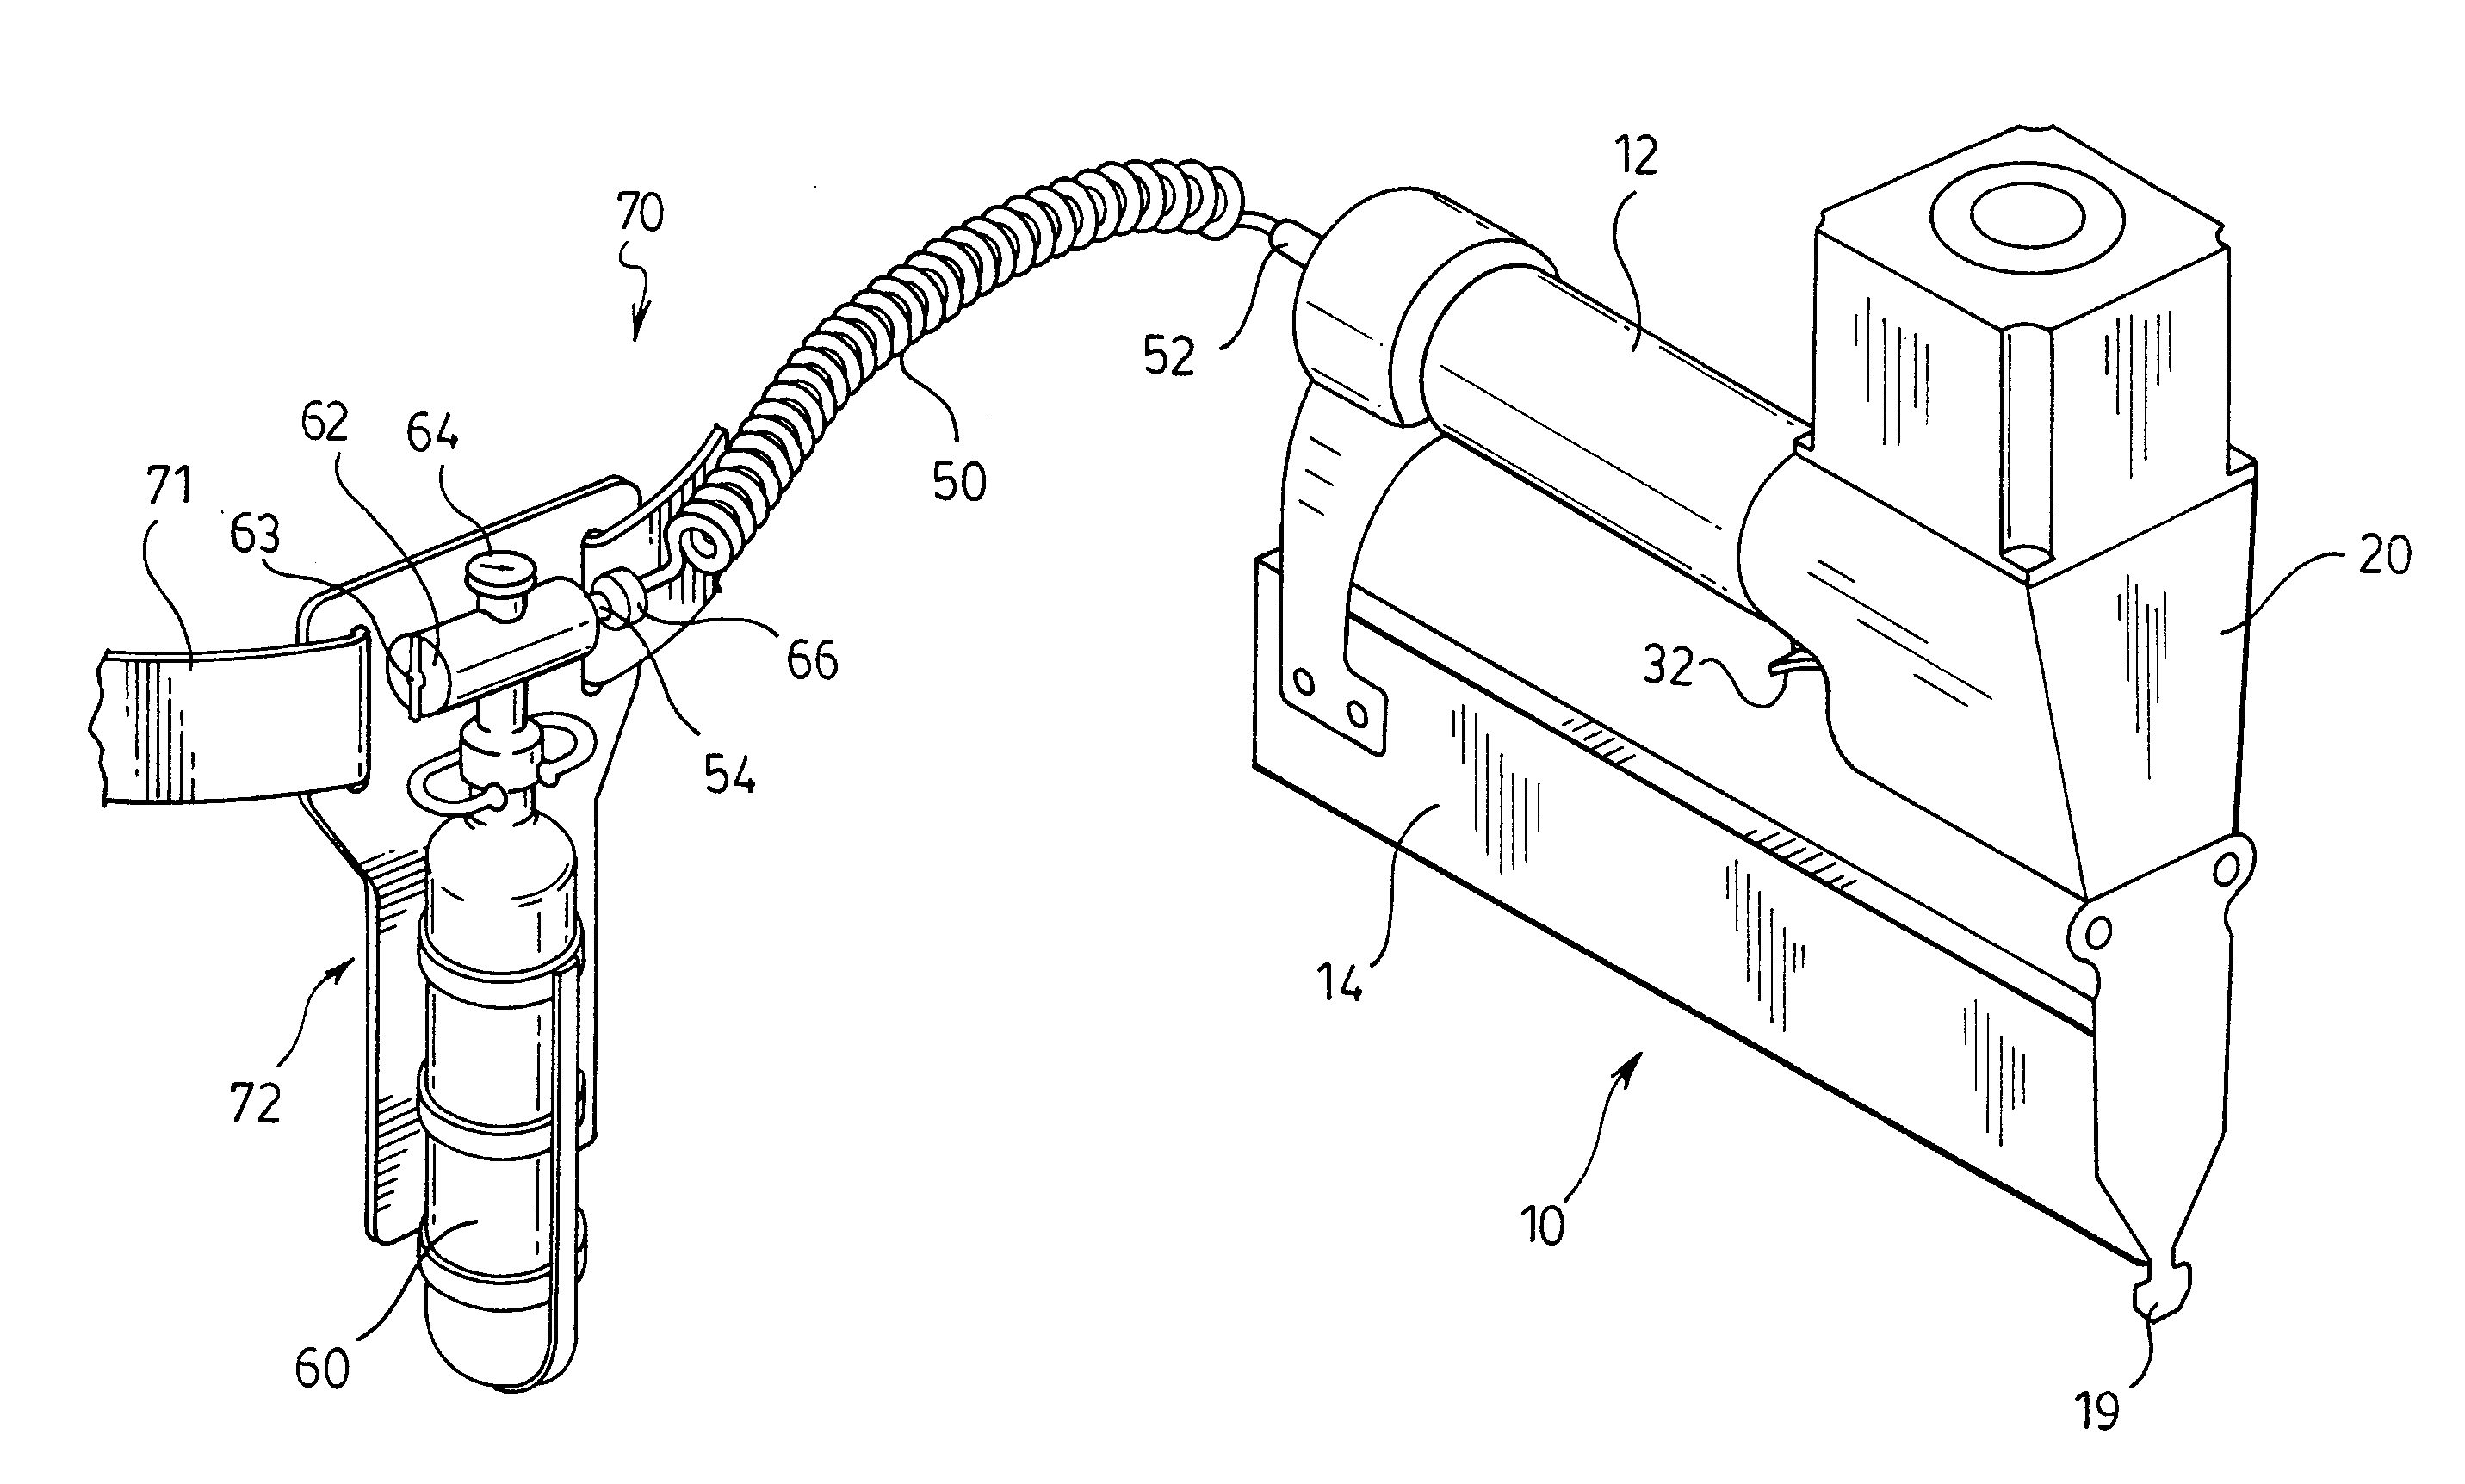 Pneumatic fastener driving system with self-contained gas source